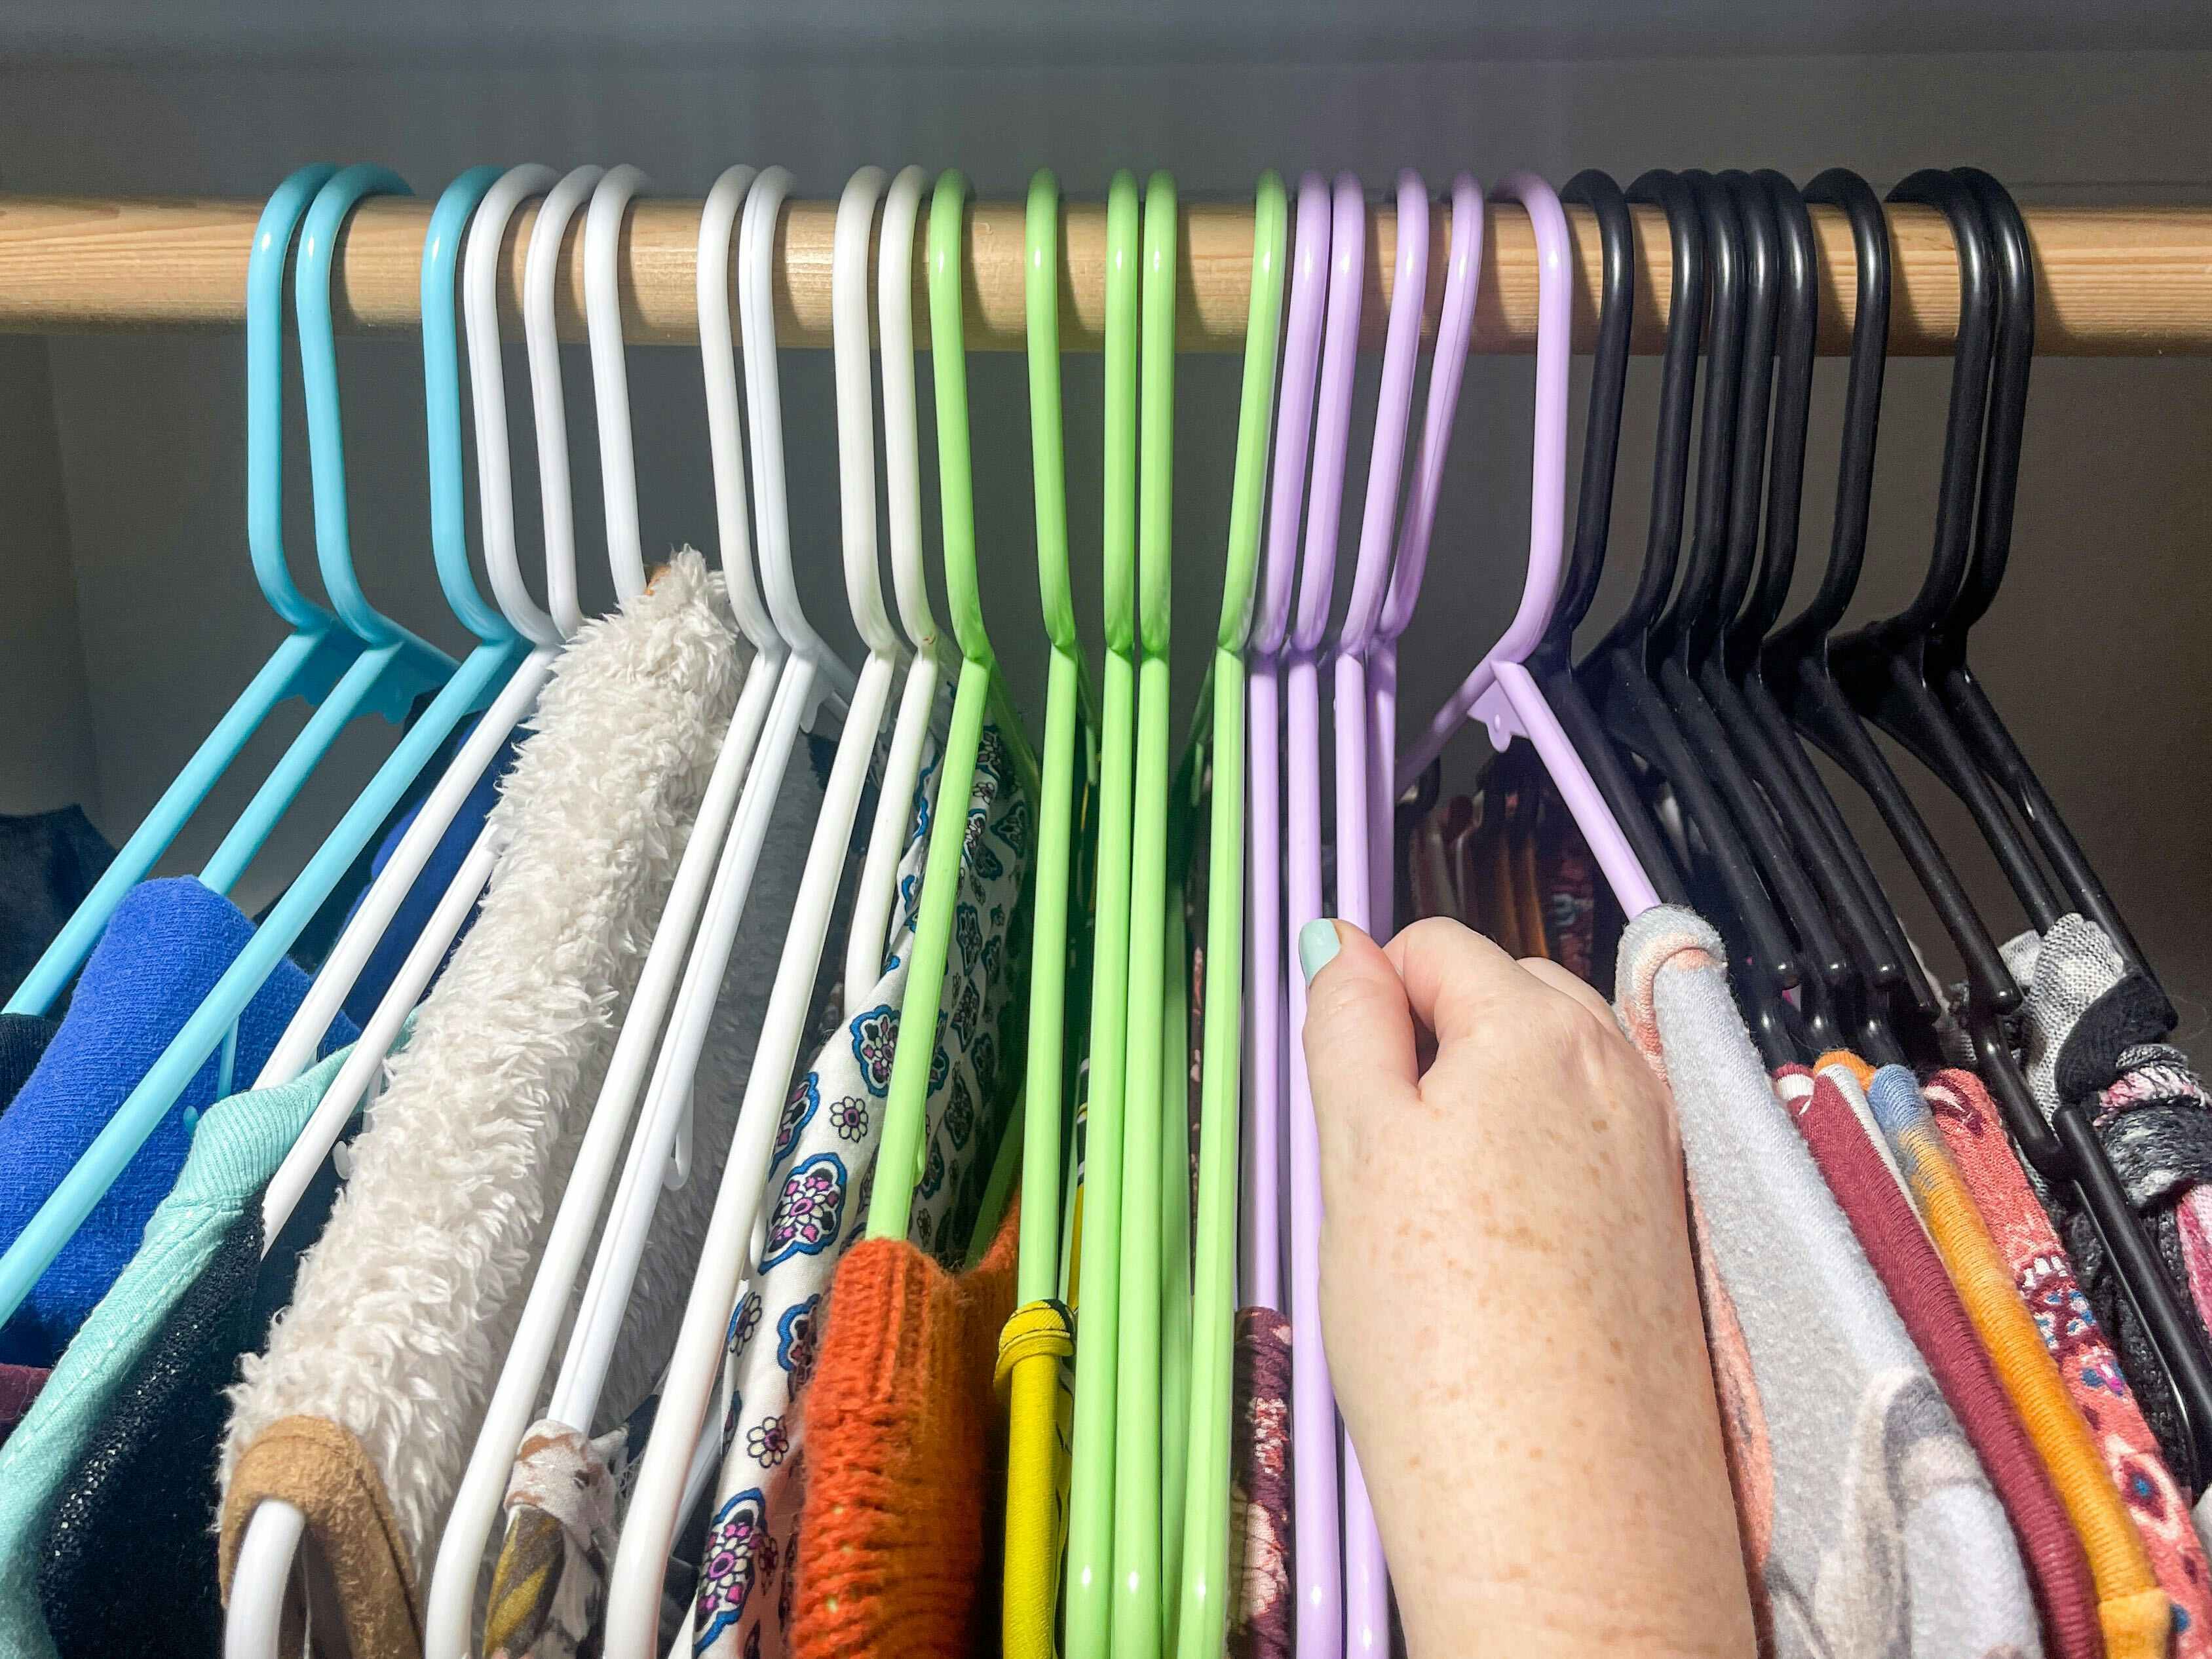 a person's hand grabbing a colored hanger in a closet